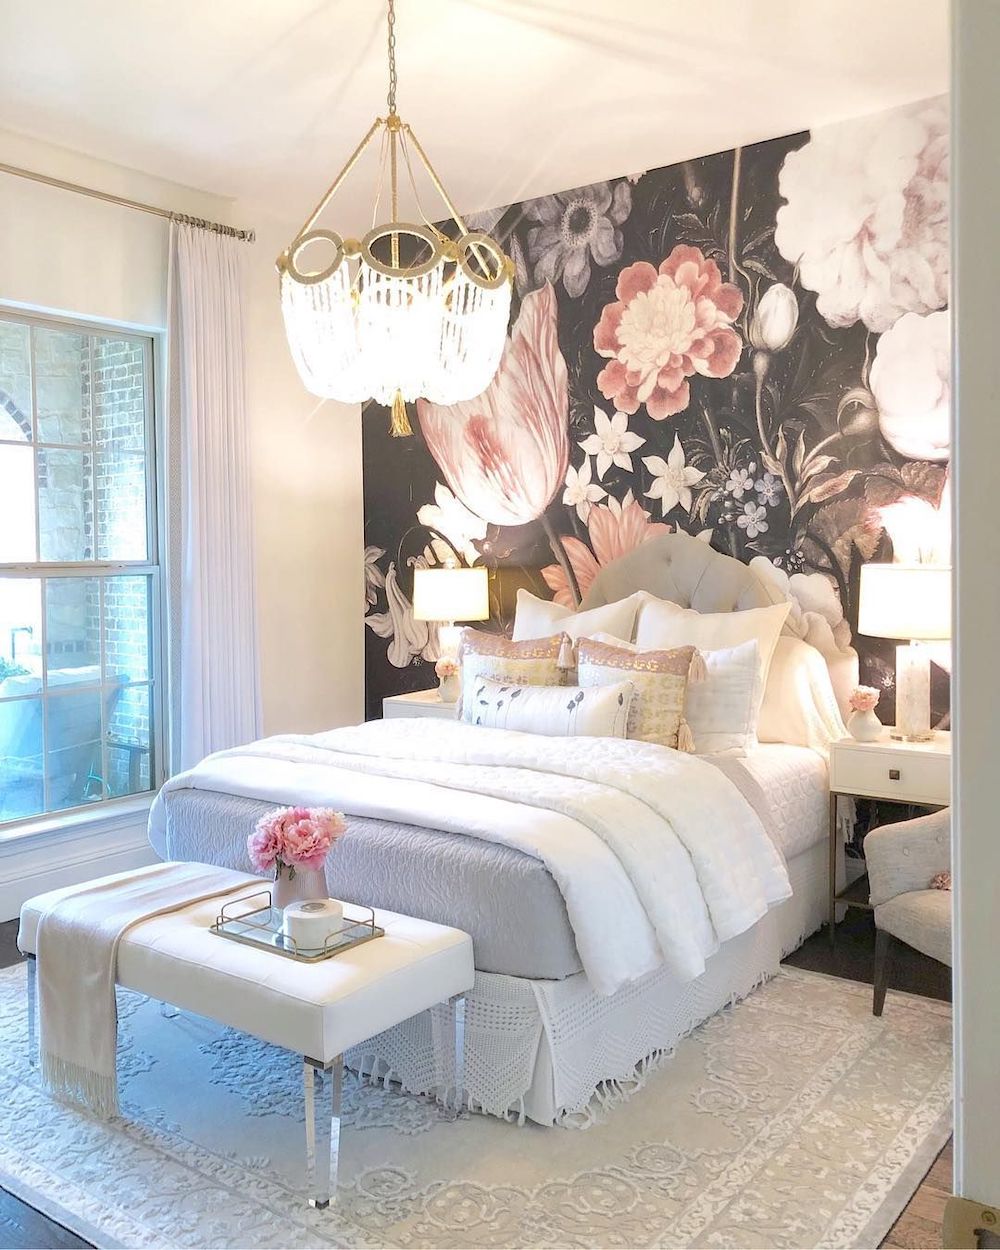 Glam Bedroom with Floral Accent Wallpaper via @decorgold